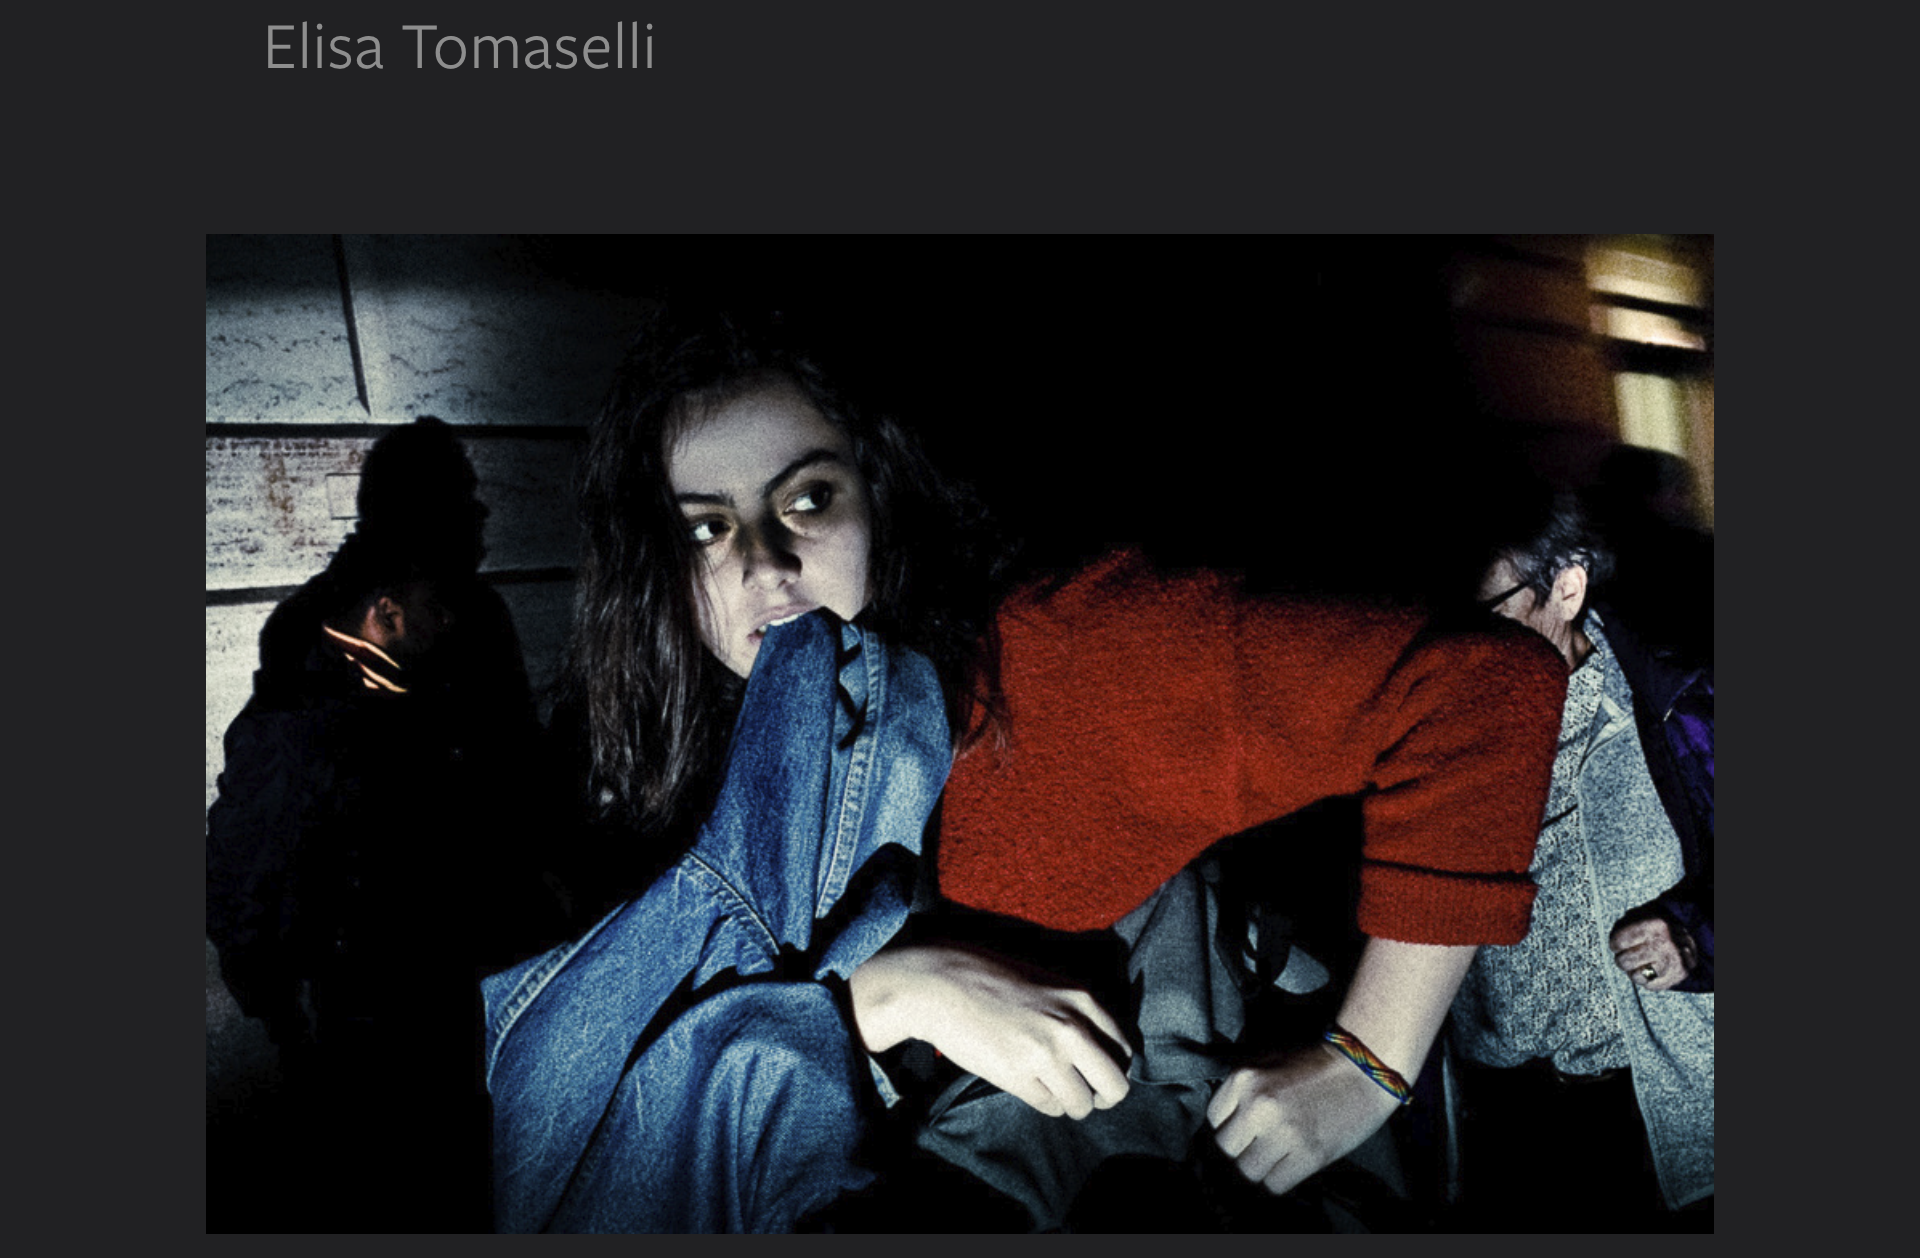 Street Photography: Remembering The Work of Elisa Tomaselli